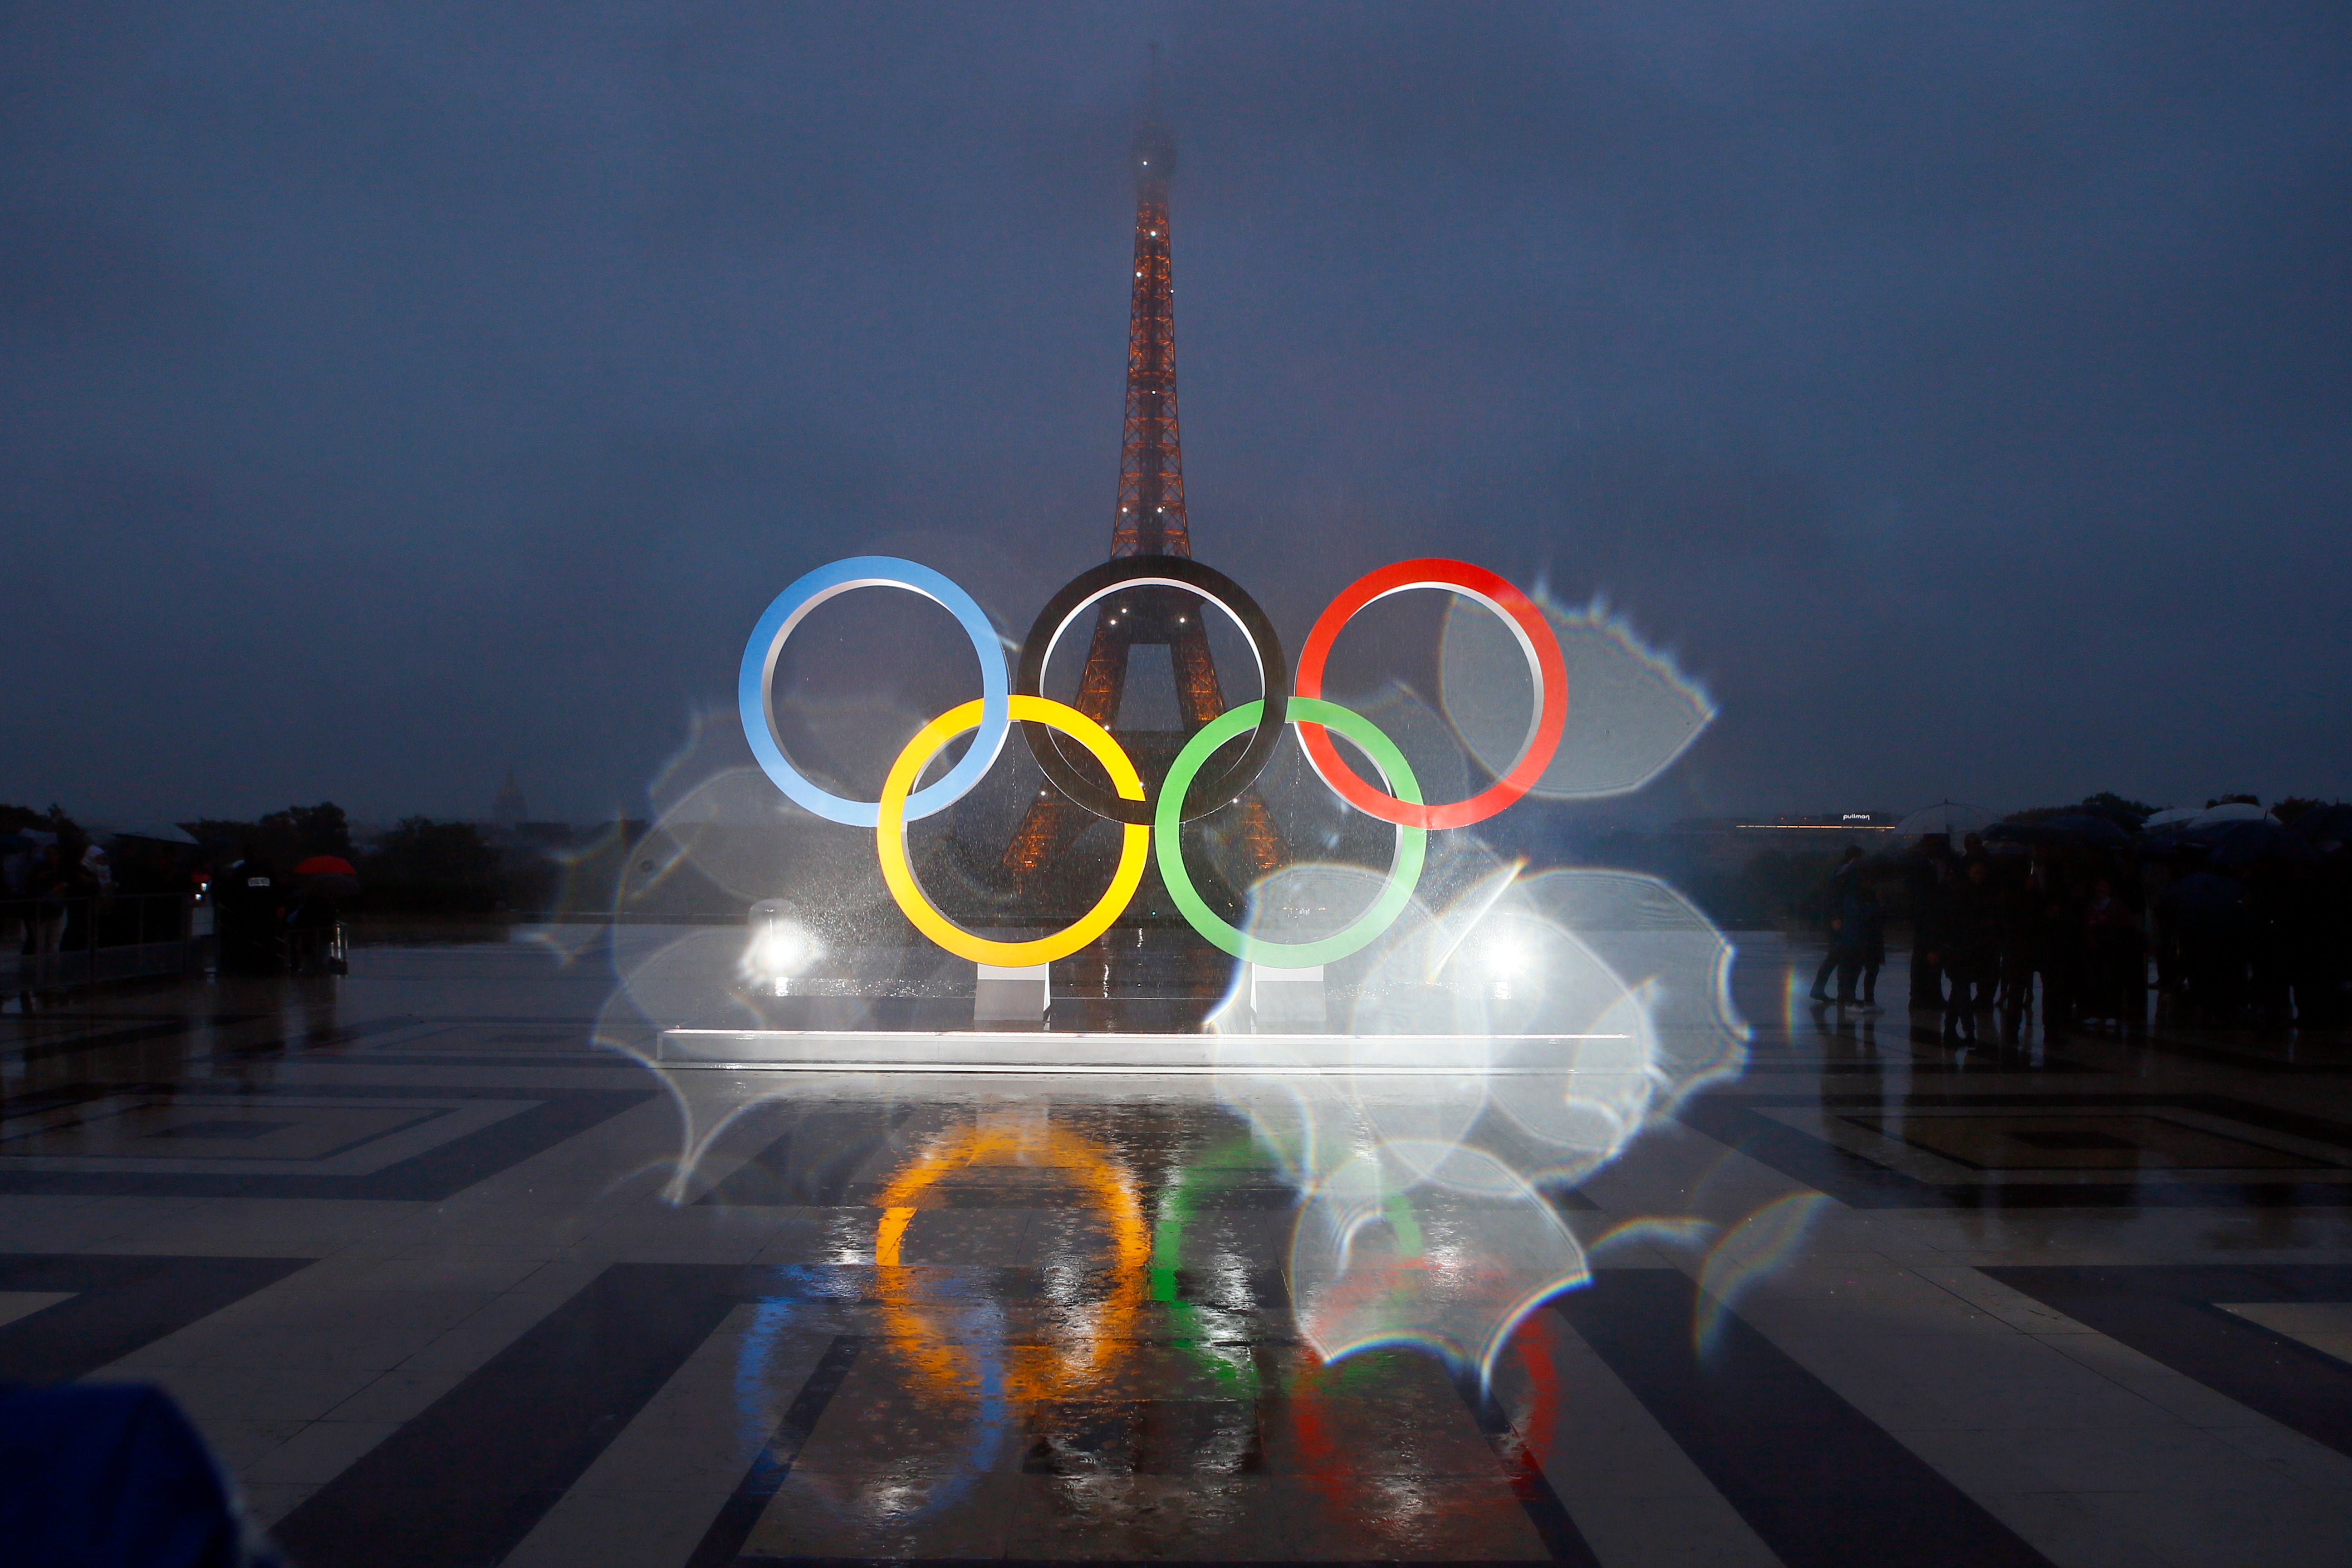 Olympic rings on Trocadero plaza that overlooks the Eiffel Tower